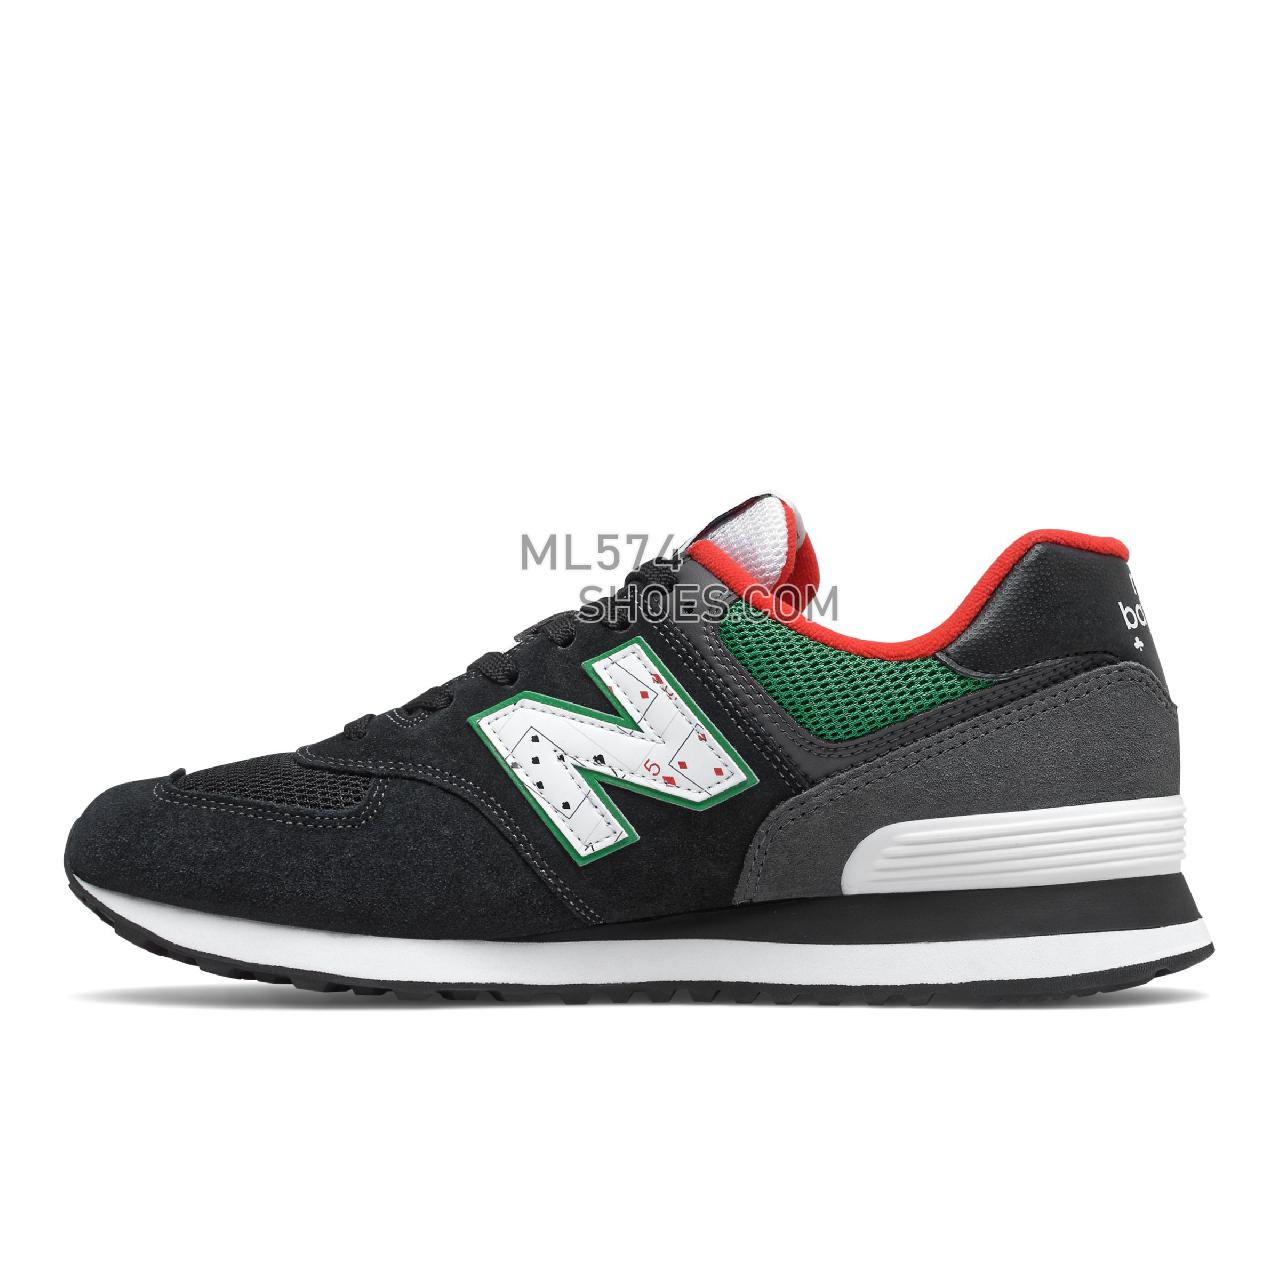 New Balance 574v2 - Men's Classic Sneakers - Black with Varsity Green - ML574WH2